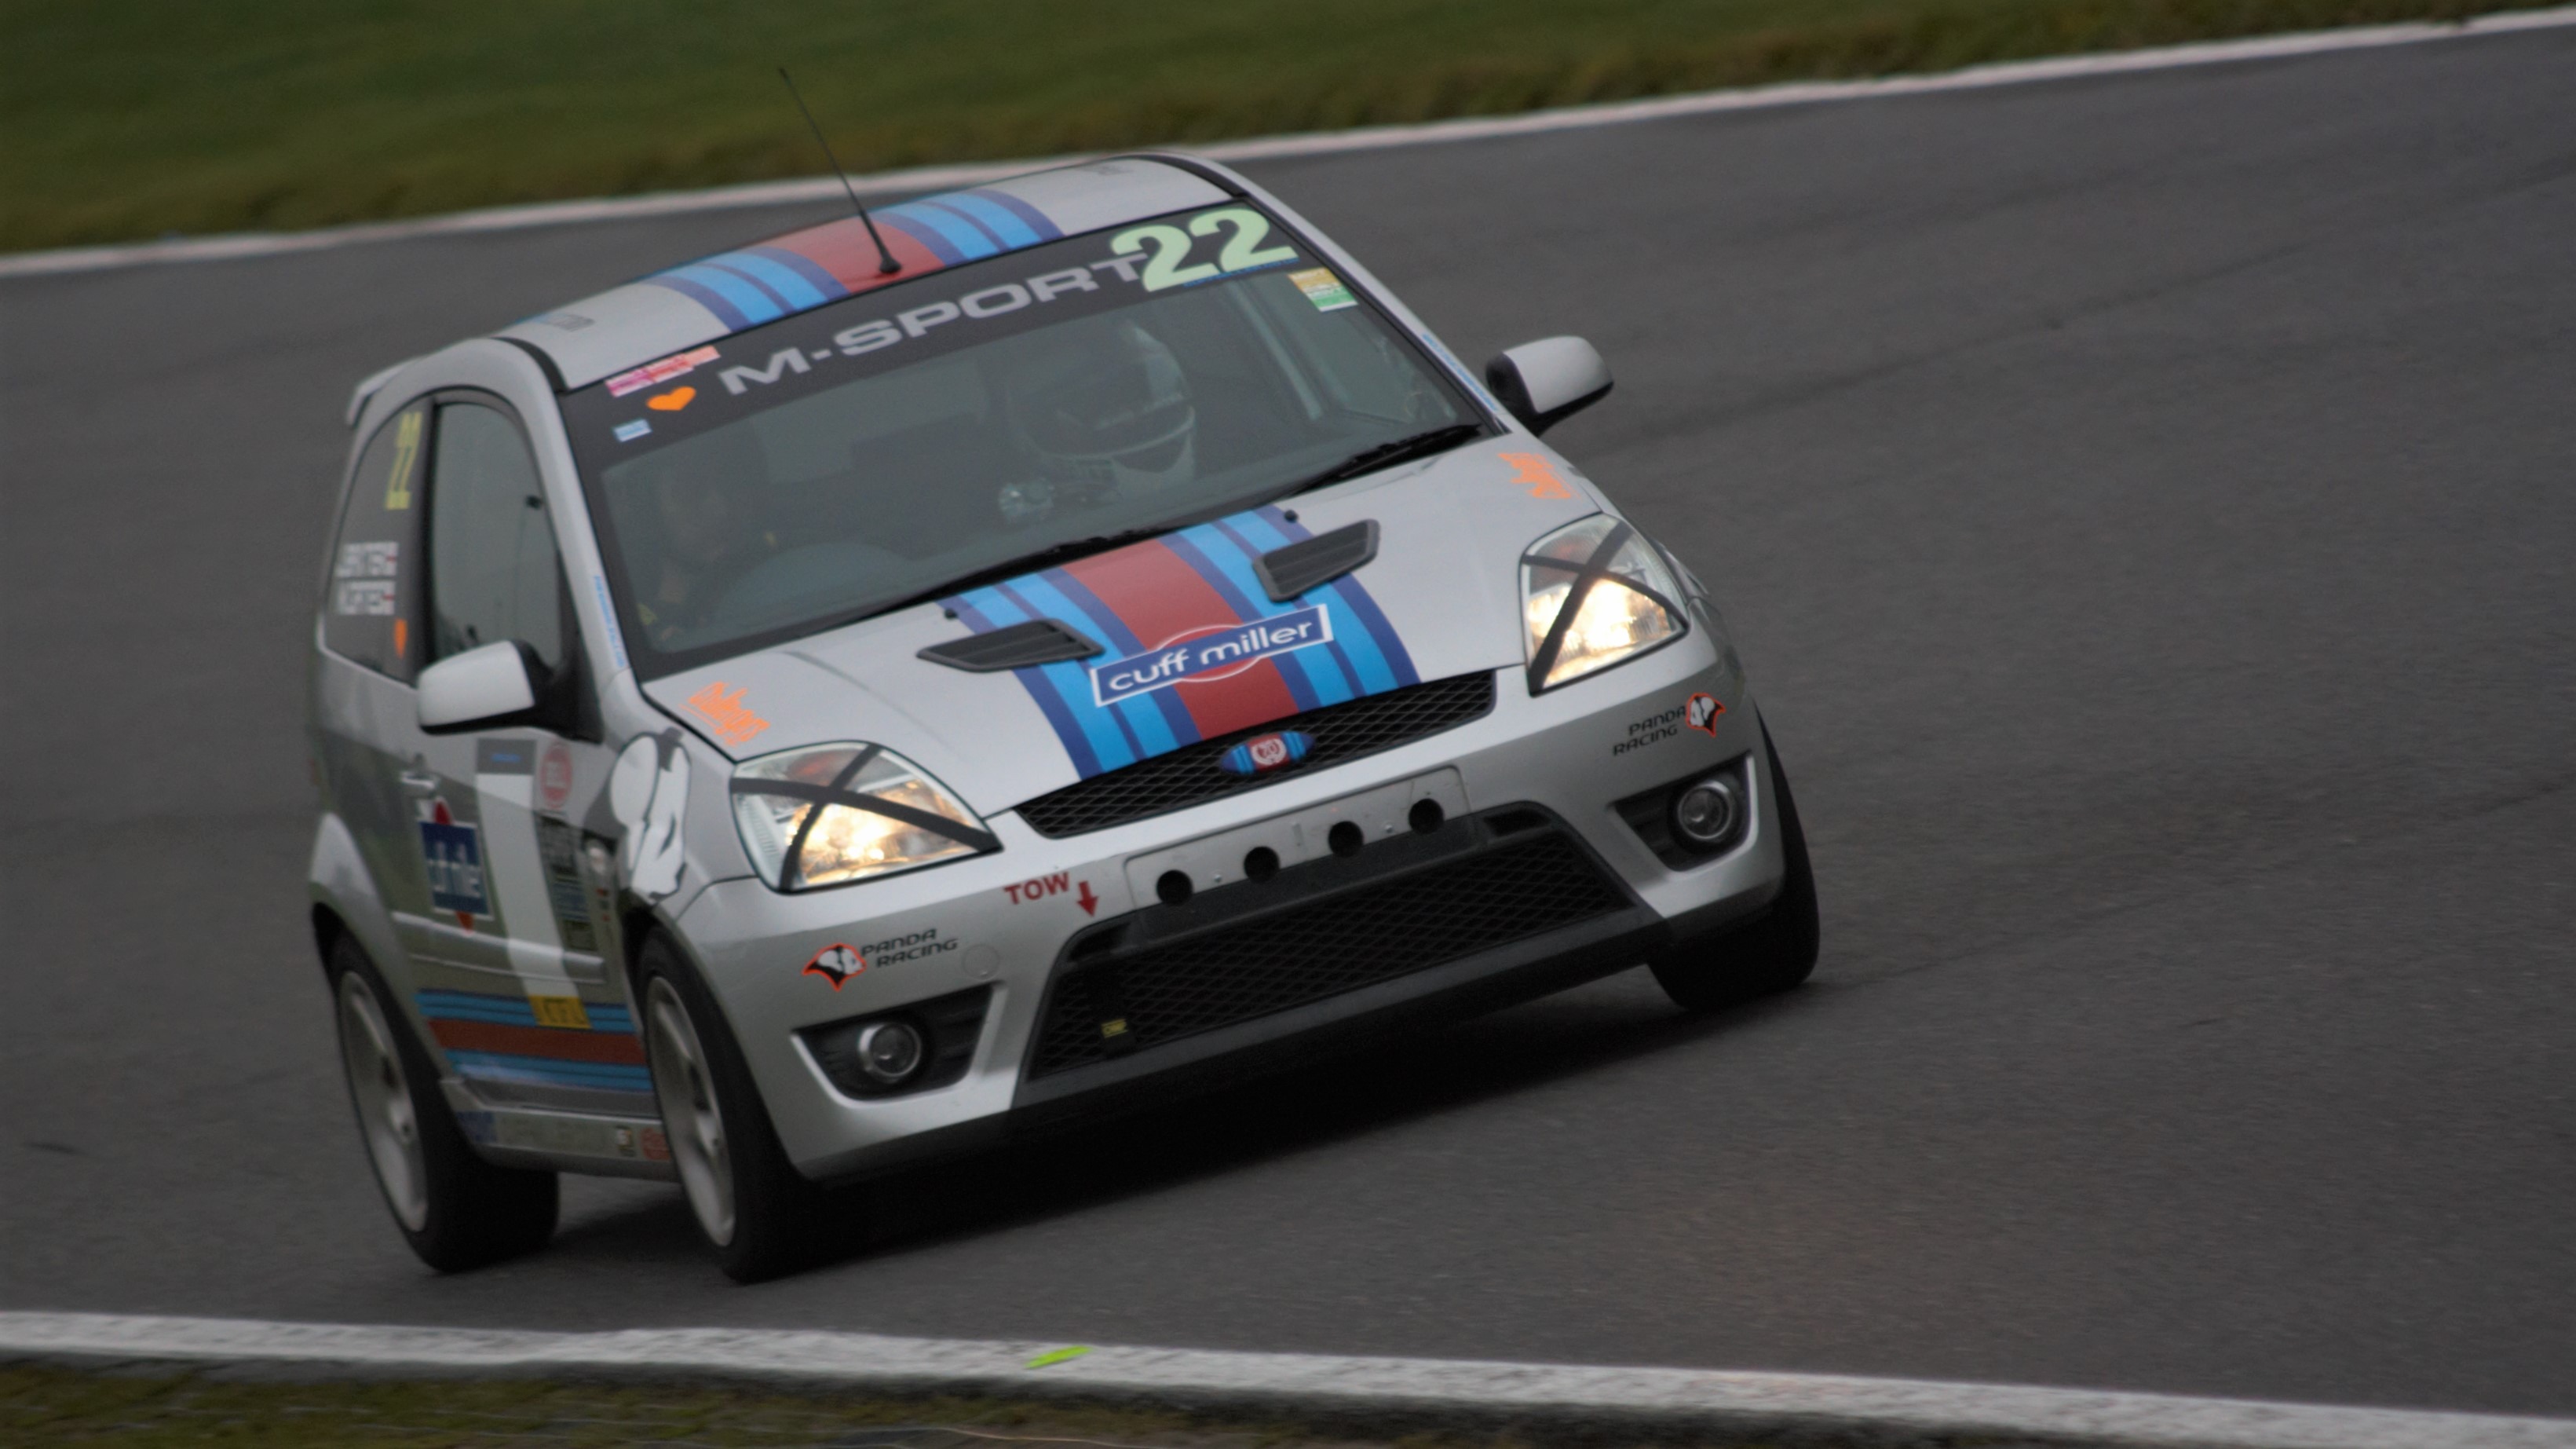 About the FiST – Our Fiesta ST Track Car